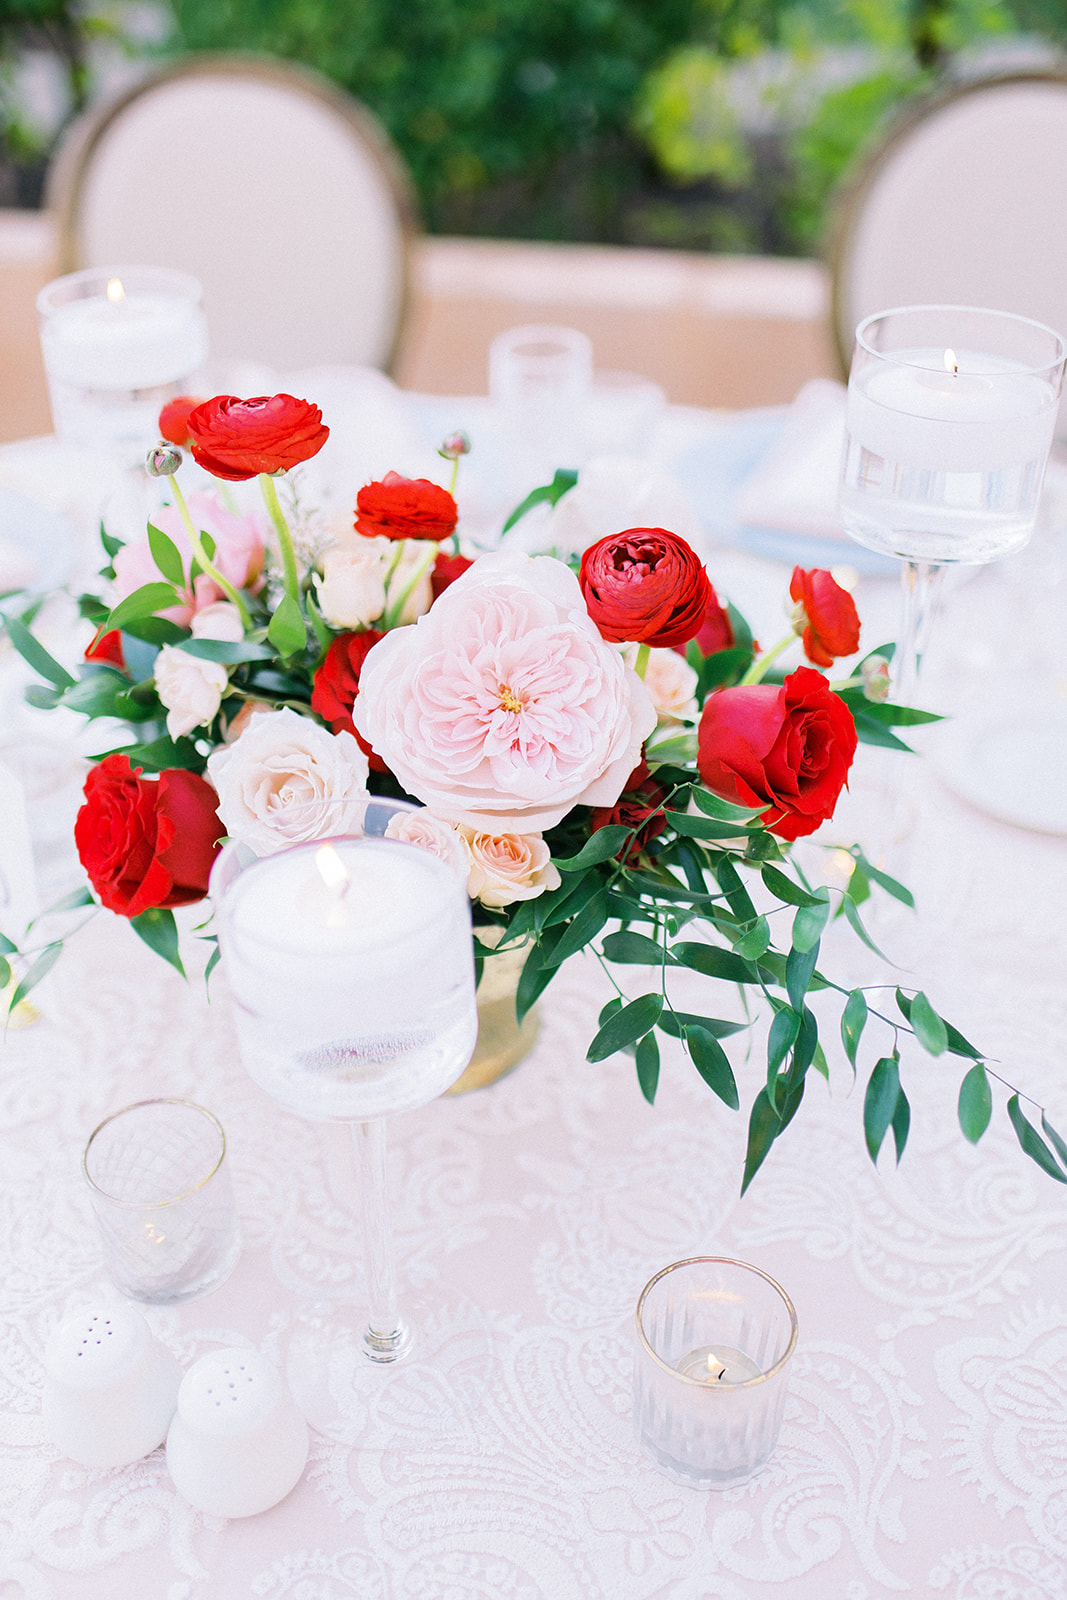 Short wedding reception centerpiece in gold vase of red, pink, and white roses and greenery.